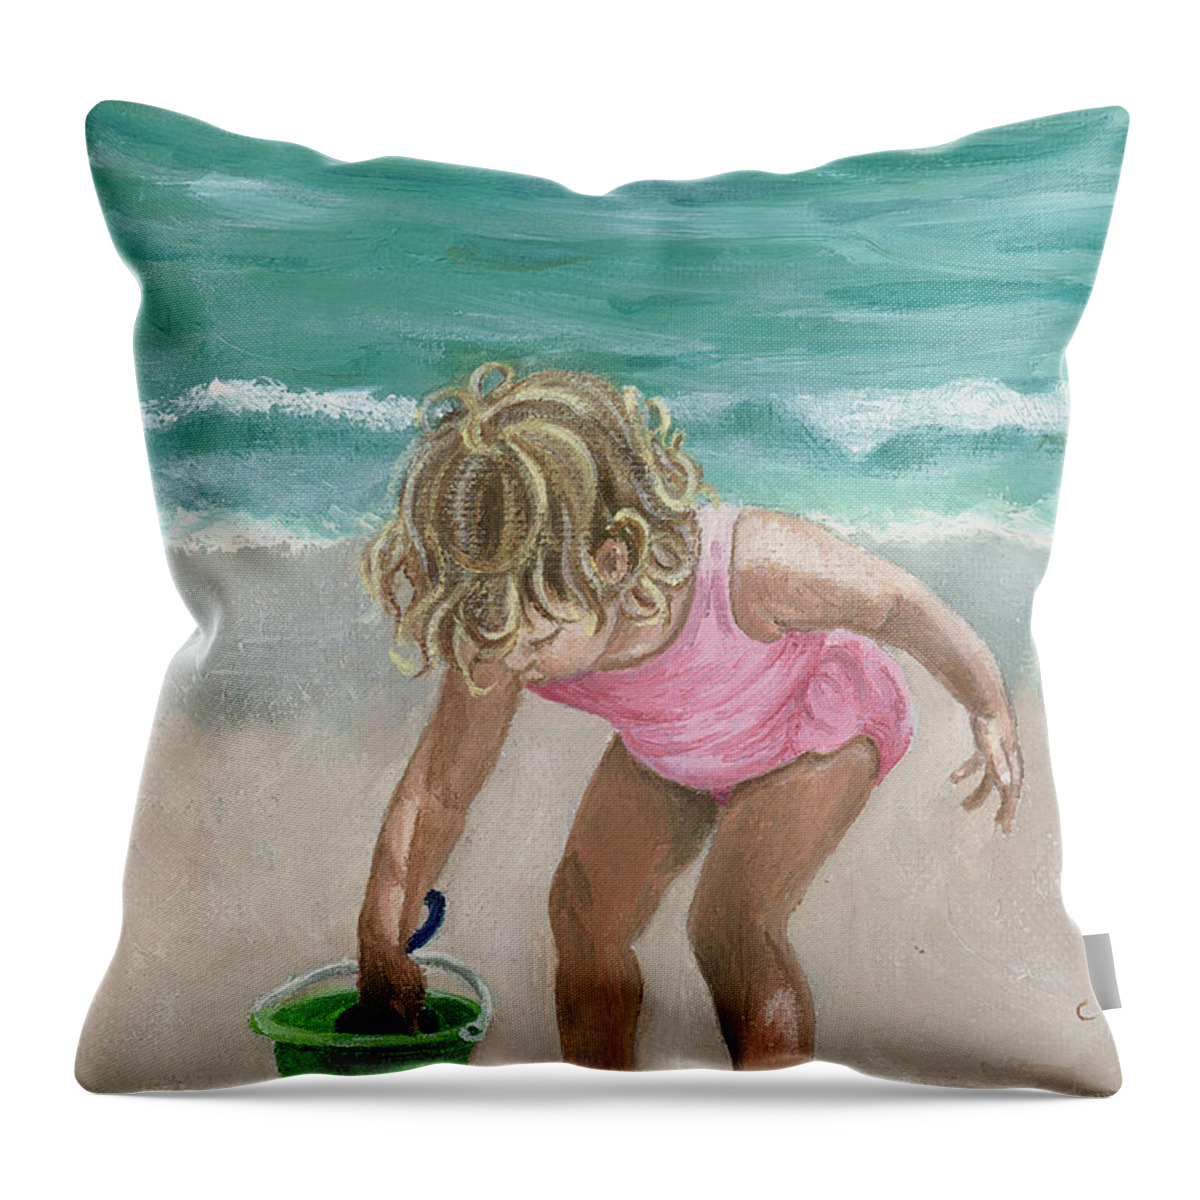 Ocean Throw Pillow featuring the painting Busy Beach Girl by Jill Ciccone Pike